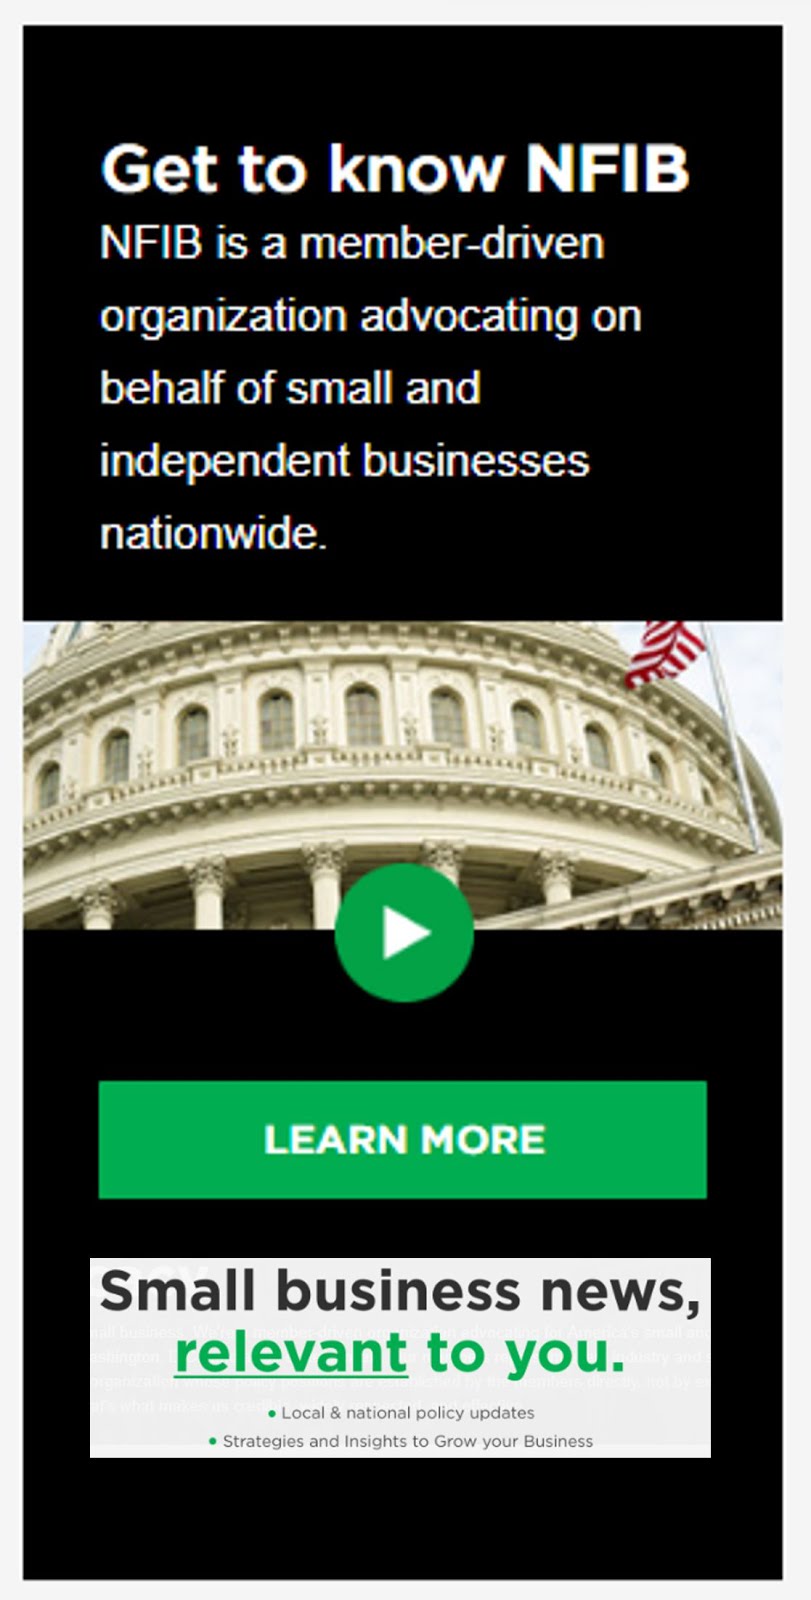 Own a Business? Join NFIB.